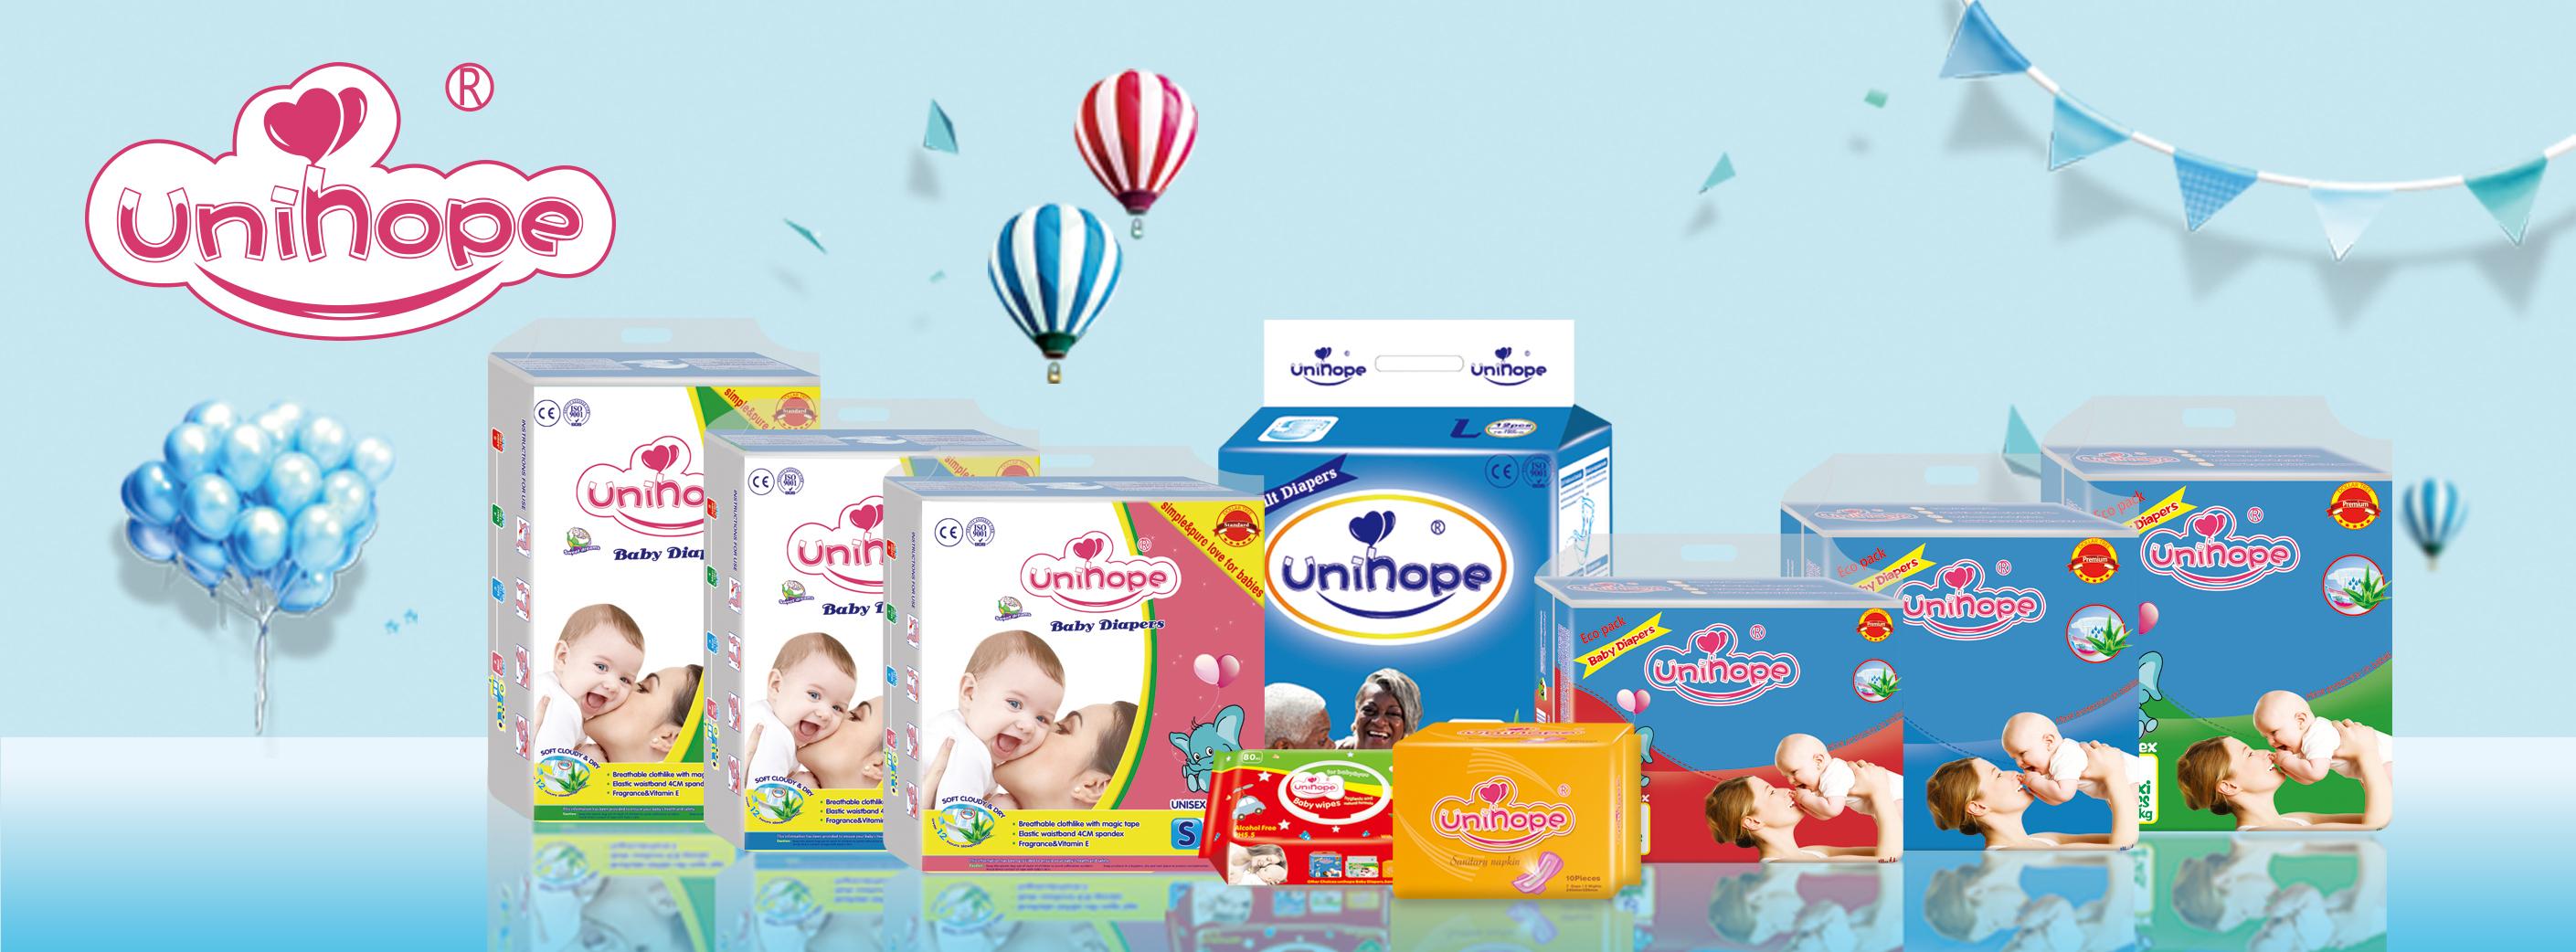 Unihope brand super thin great quality comfort baby diapers and pant nappy with cheap price